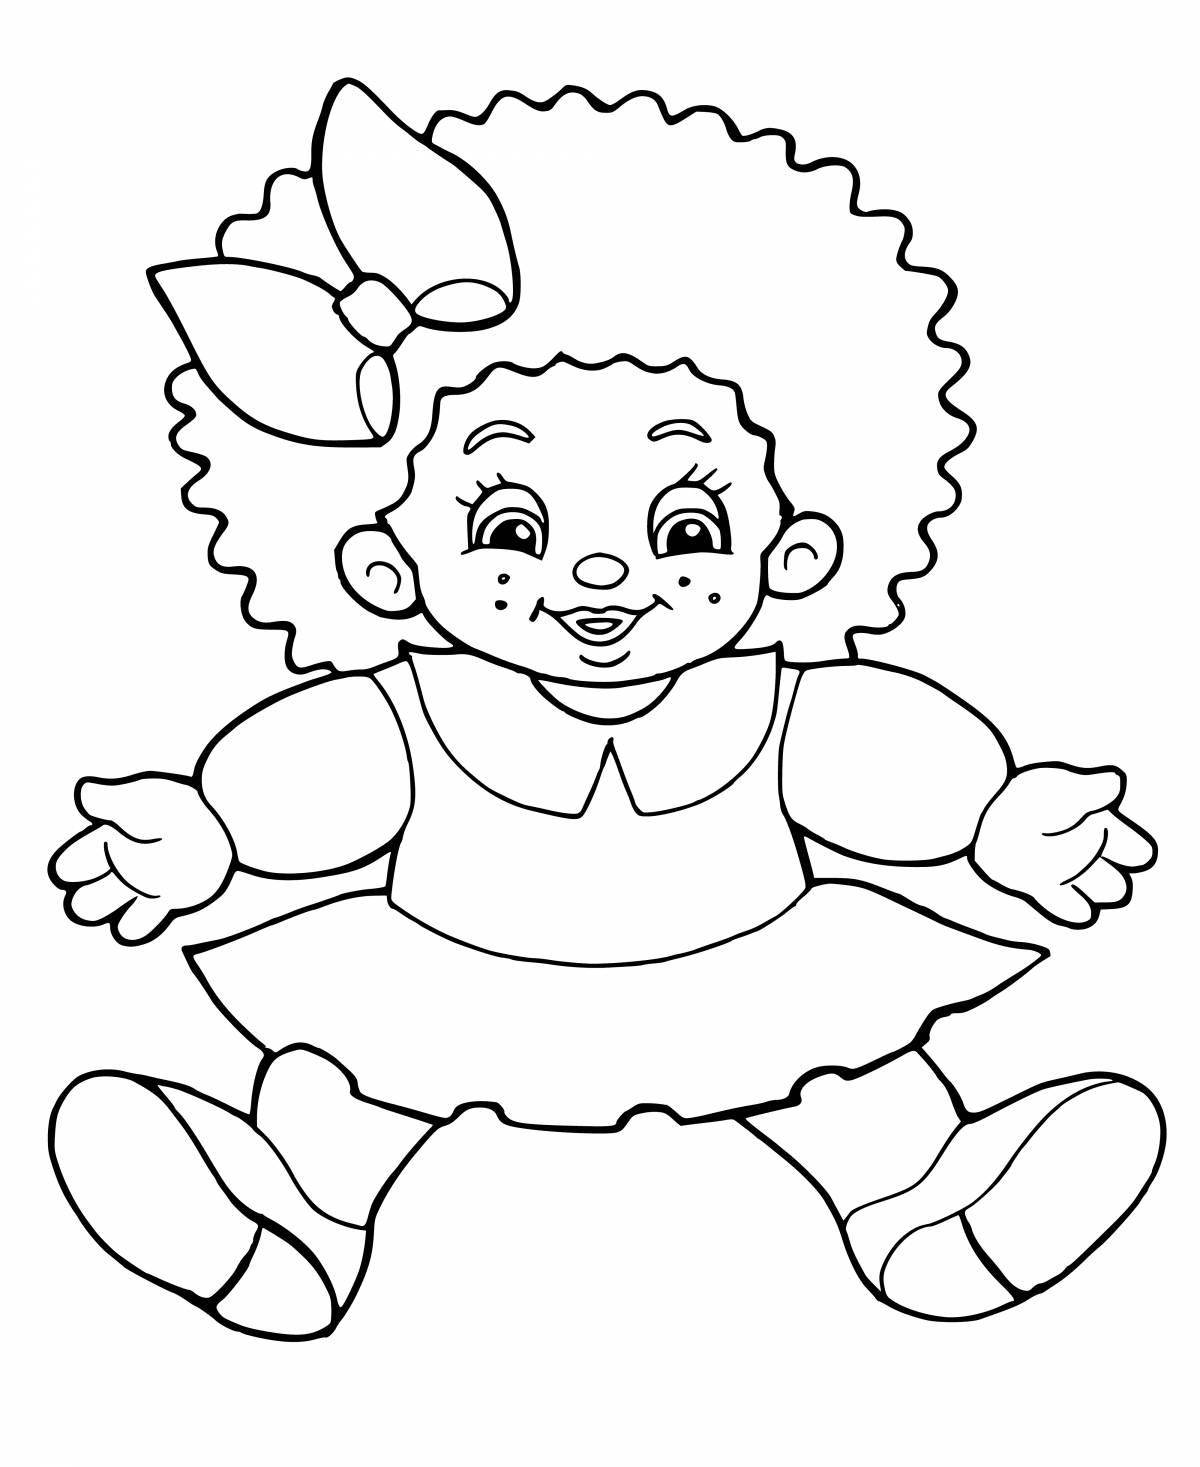 Sweet coloring doll for 4-5 year olds